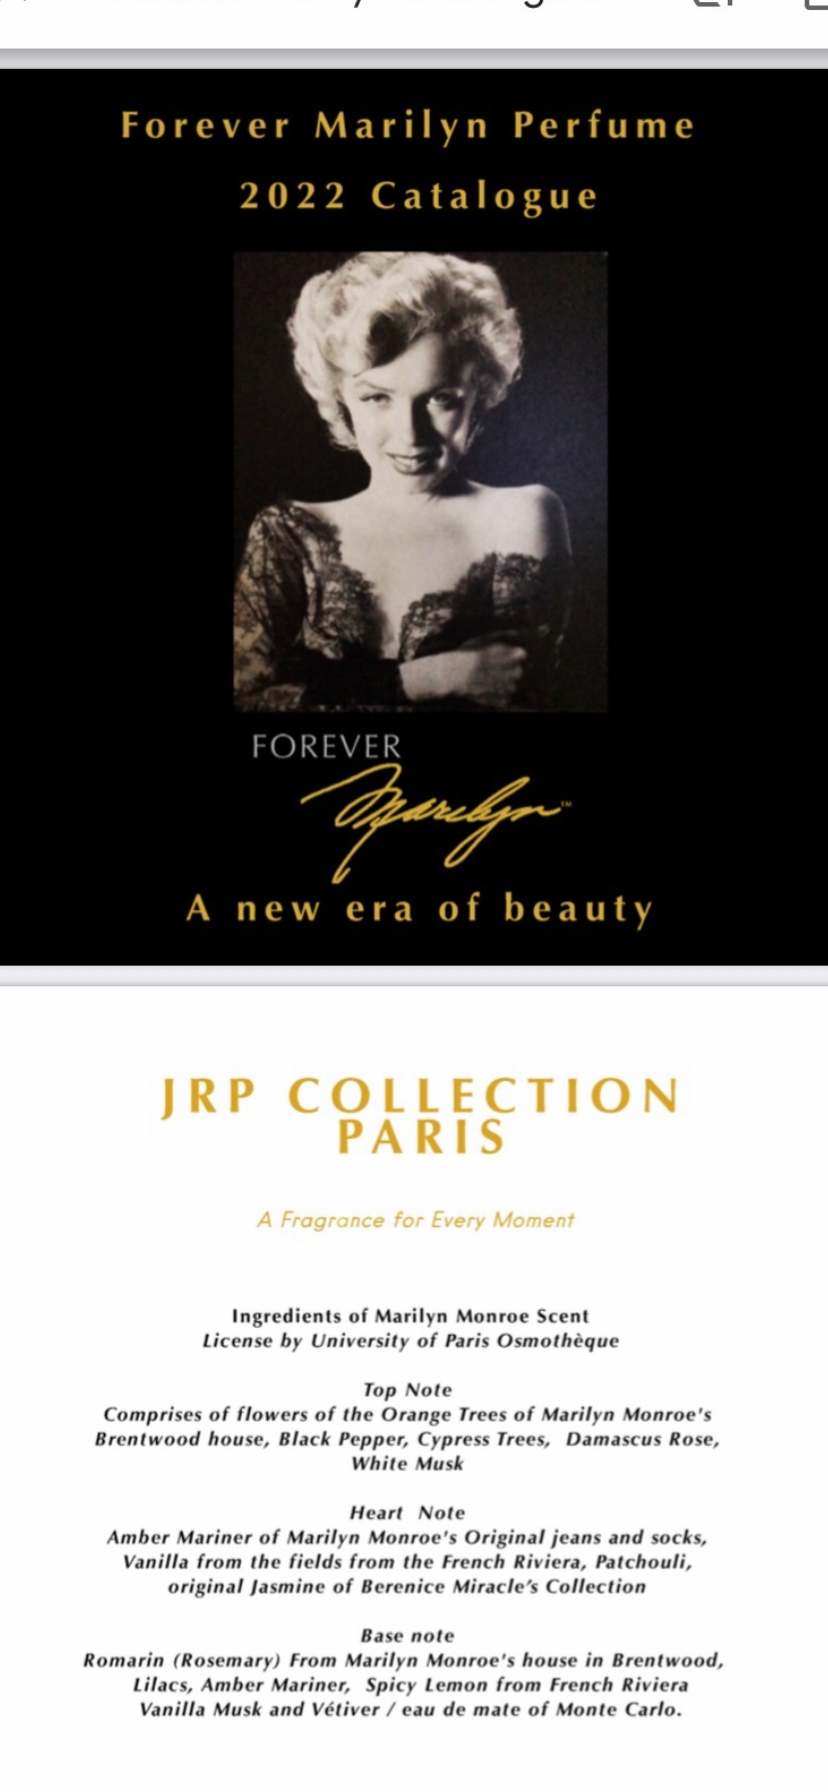  A new era of beauty  by jrp collection  Paris and Solidus fragranceinternational